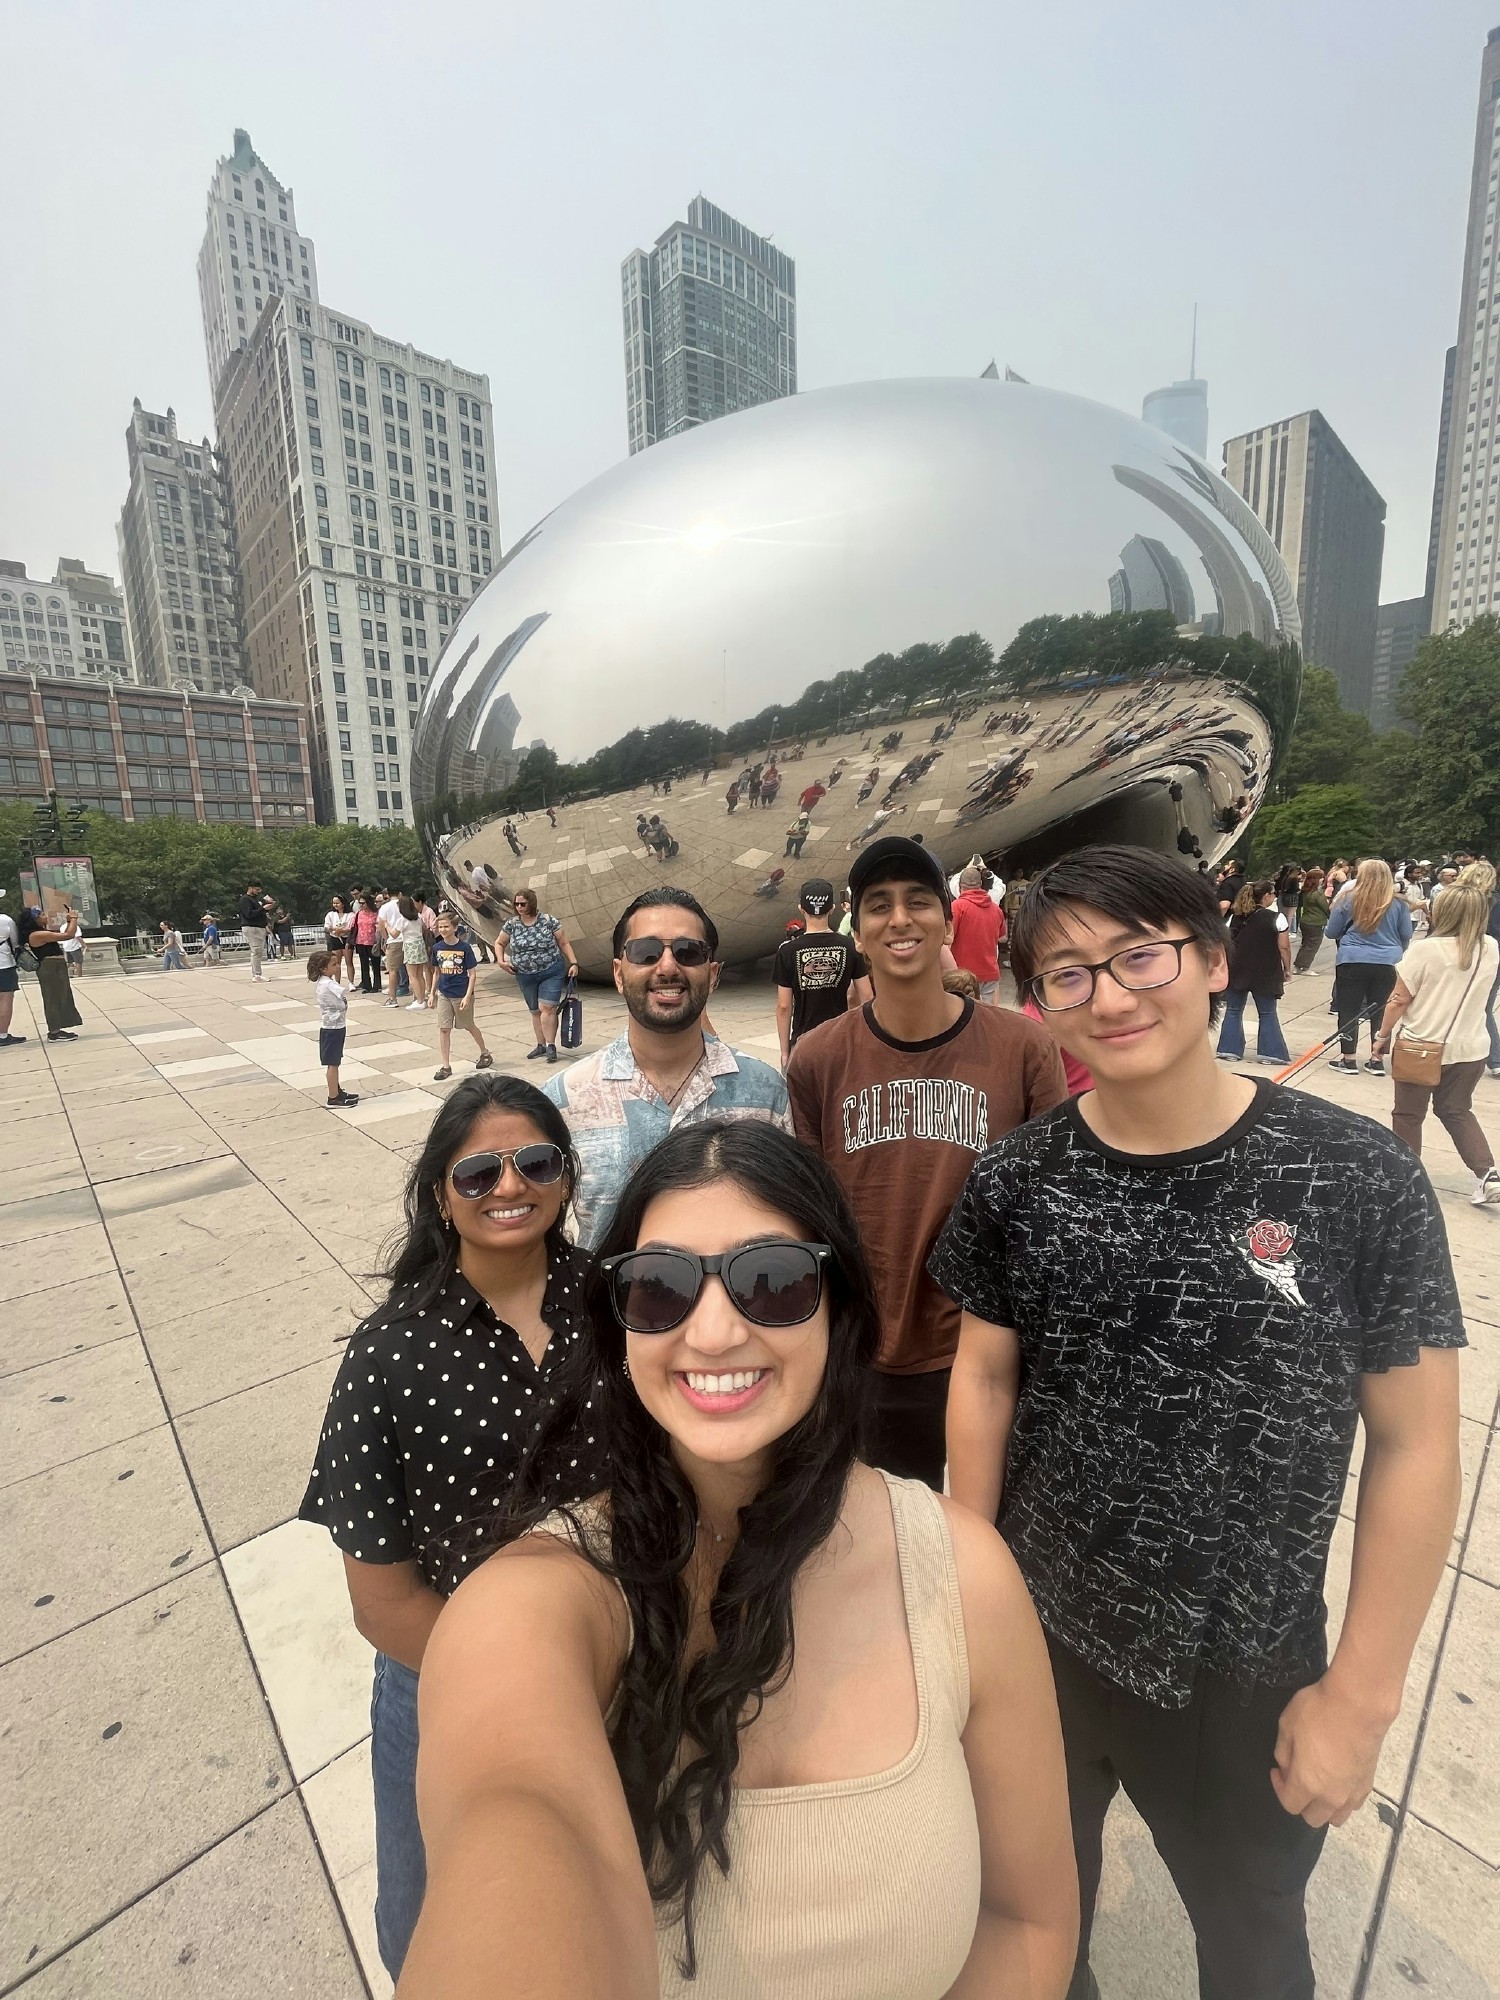 Our Tech Interns exploring Chicago together during the summer!